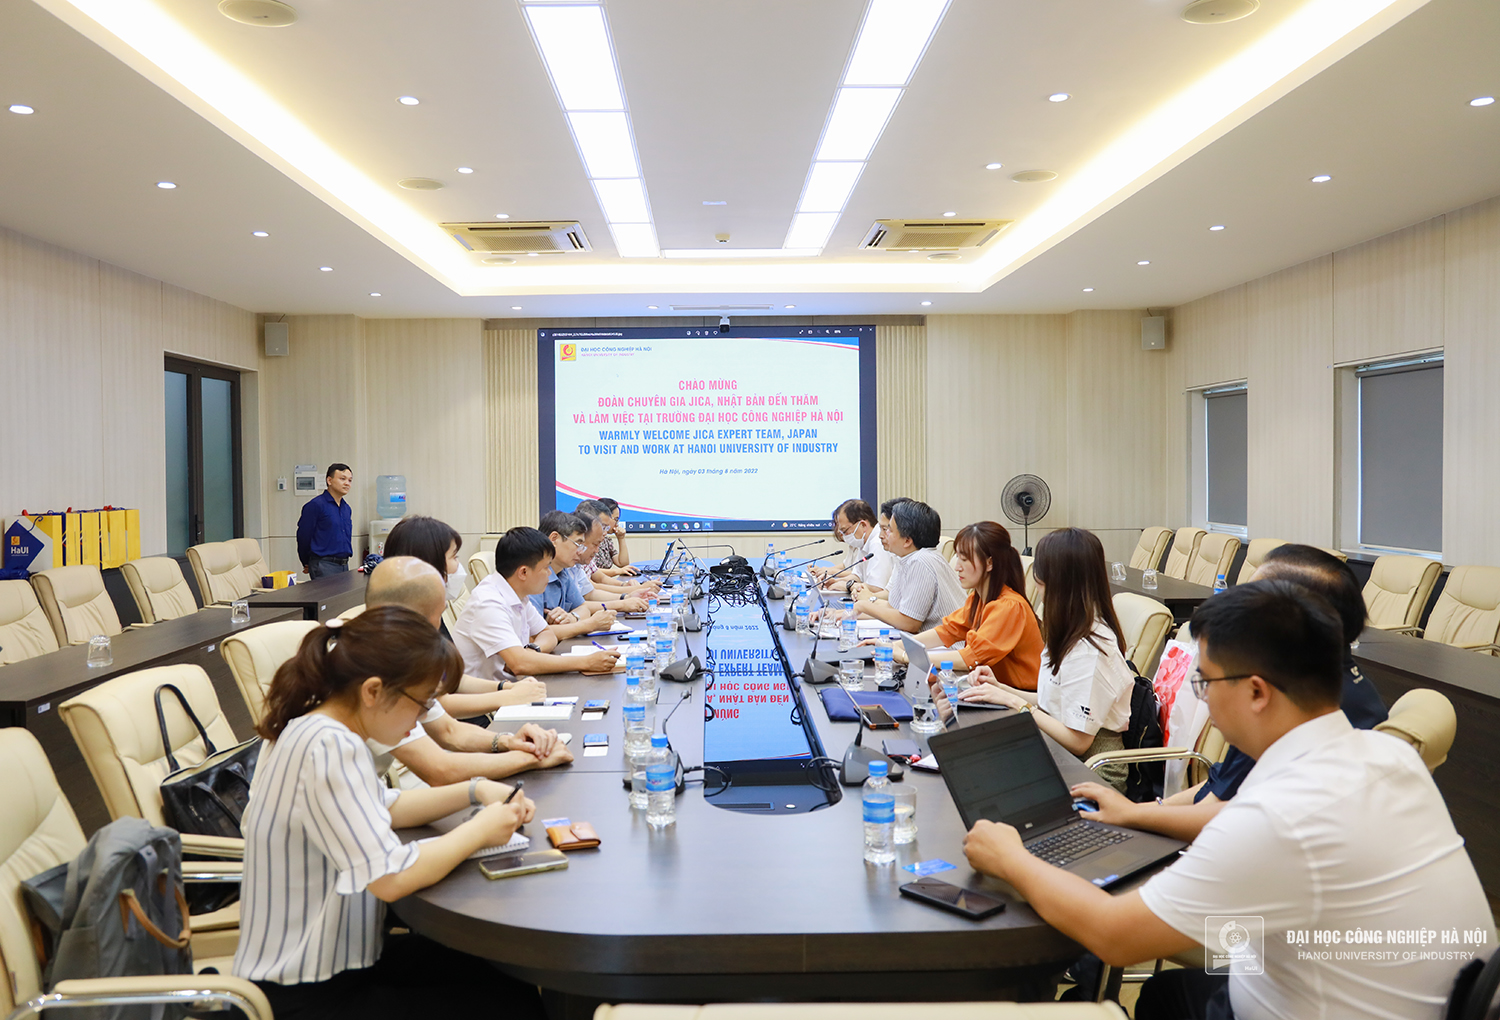 The delegation of Japanese experts paid a working visit to Hanoi University of Industry